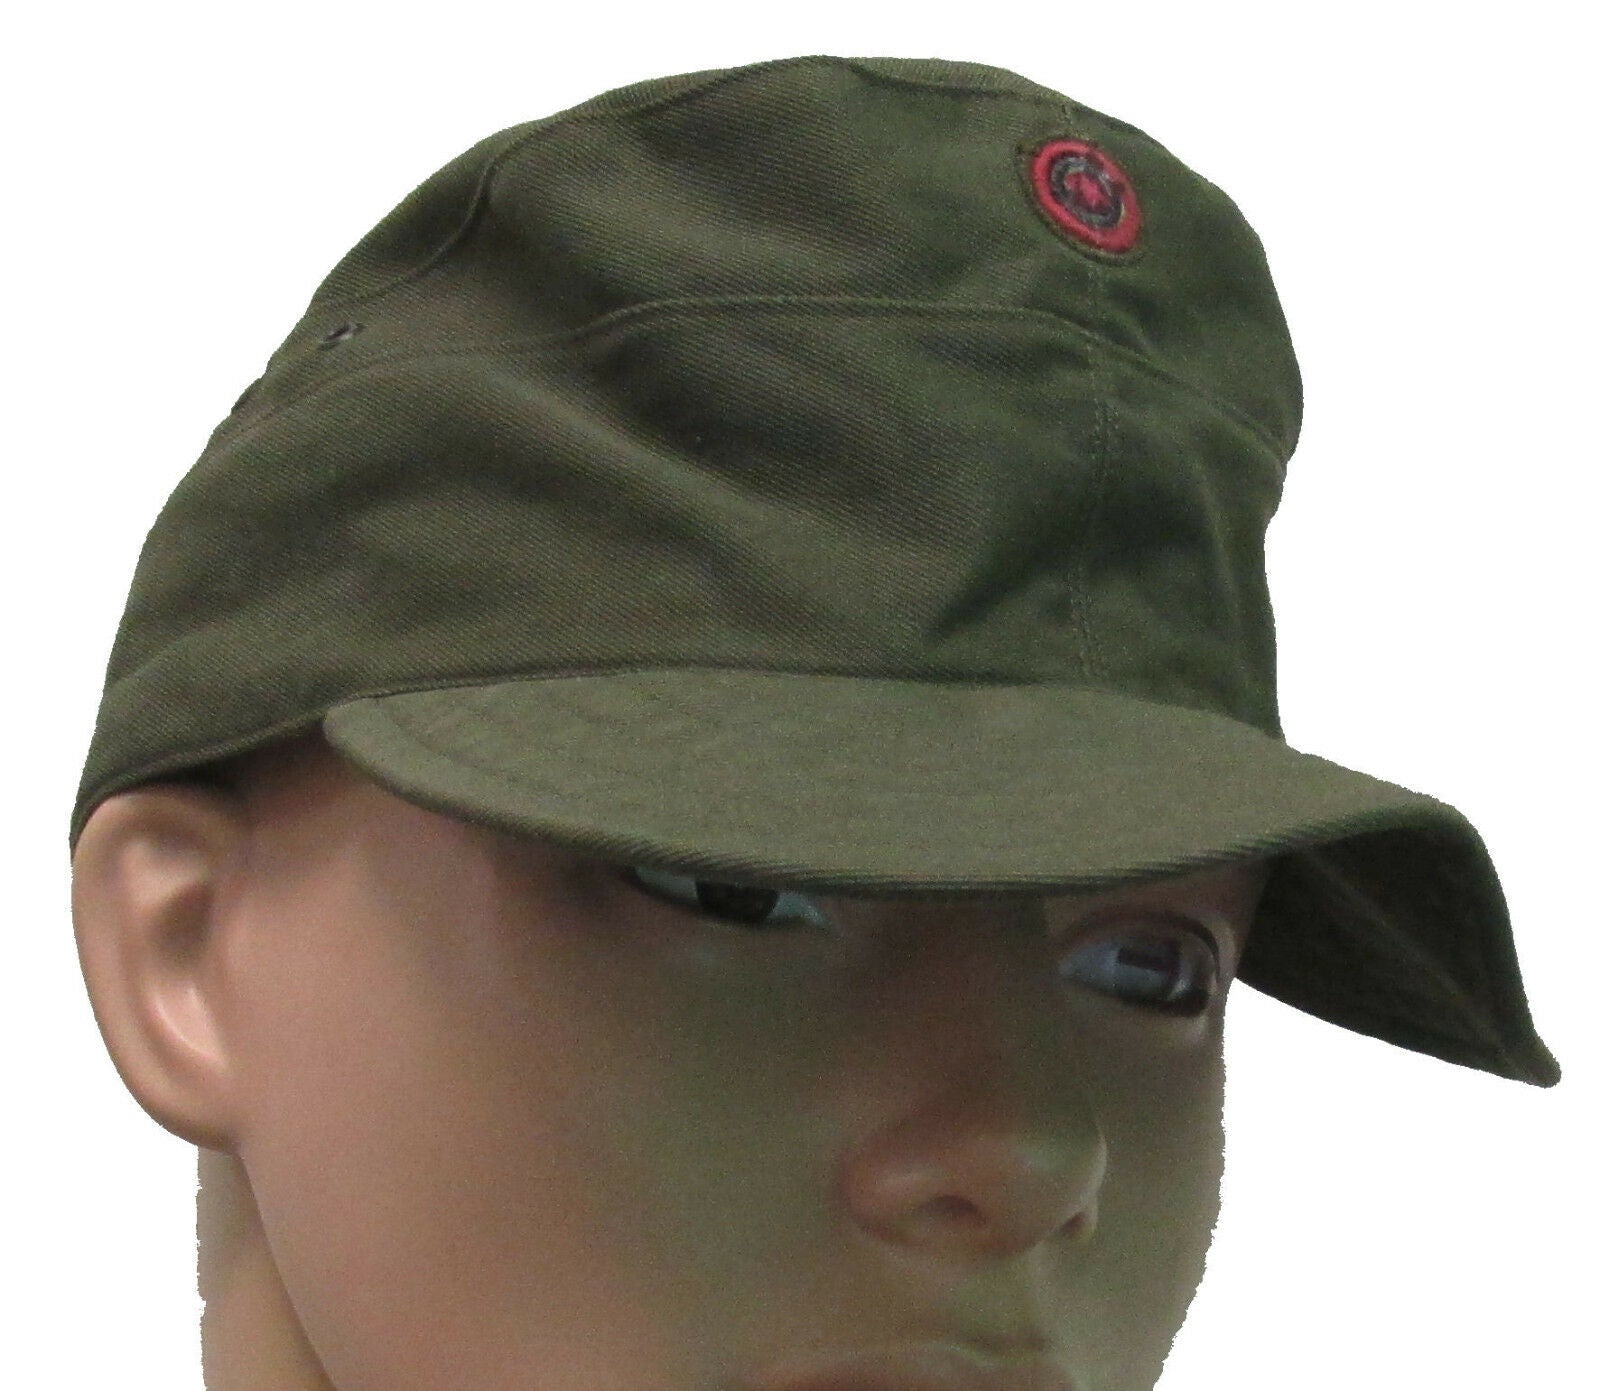 Austrian Military Field Cap - Olive Drab - Various Sizes - CLEARANCE!